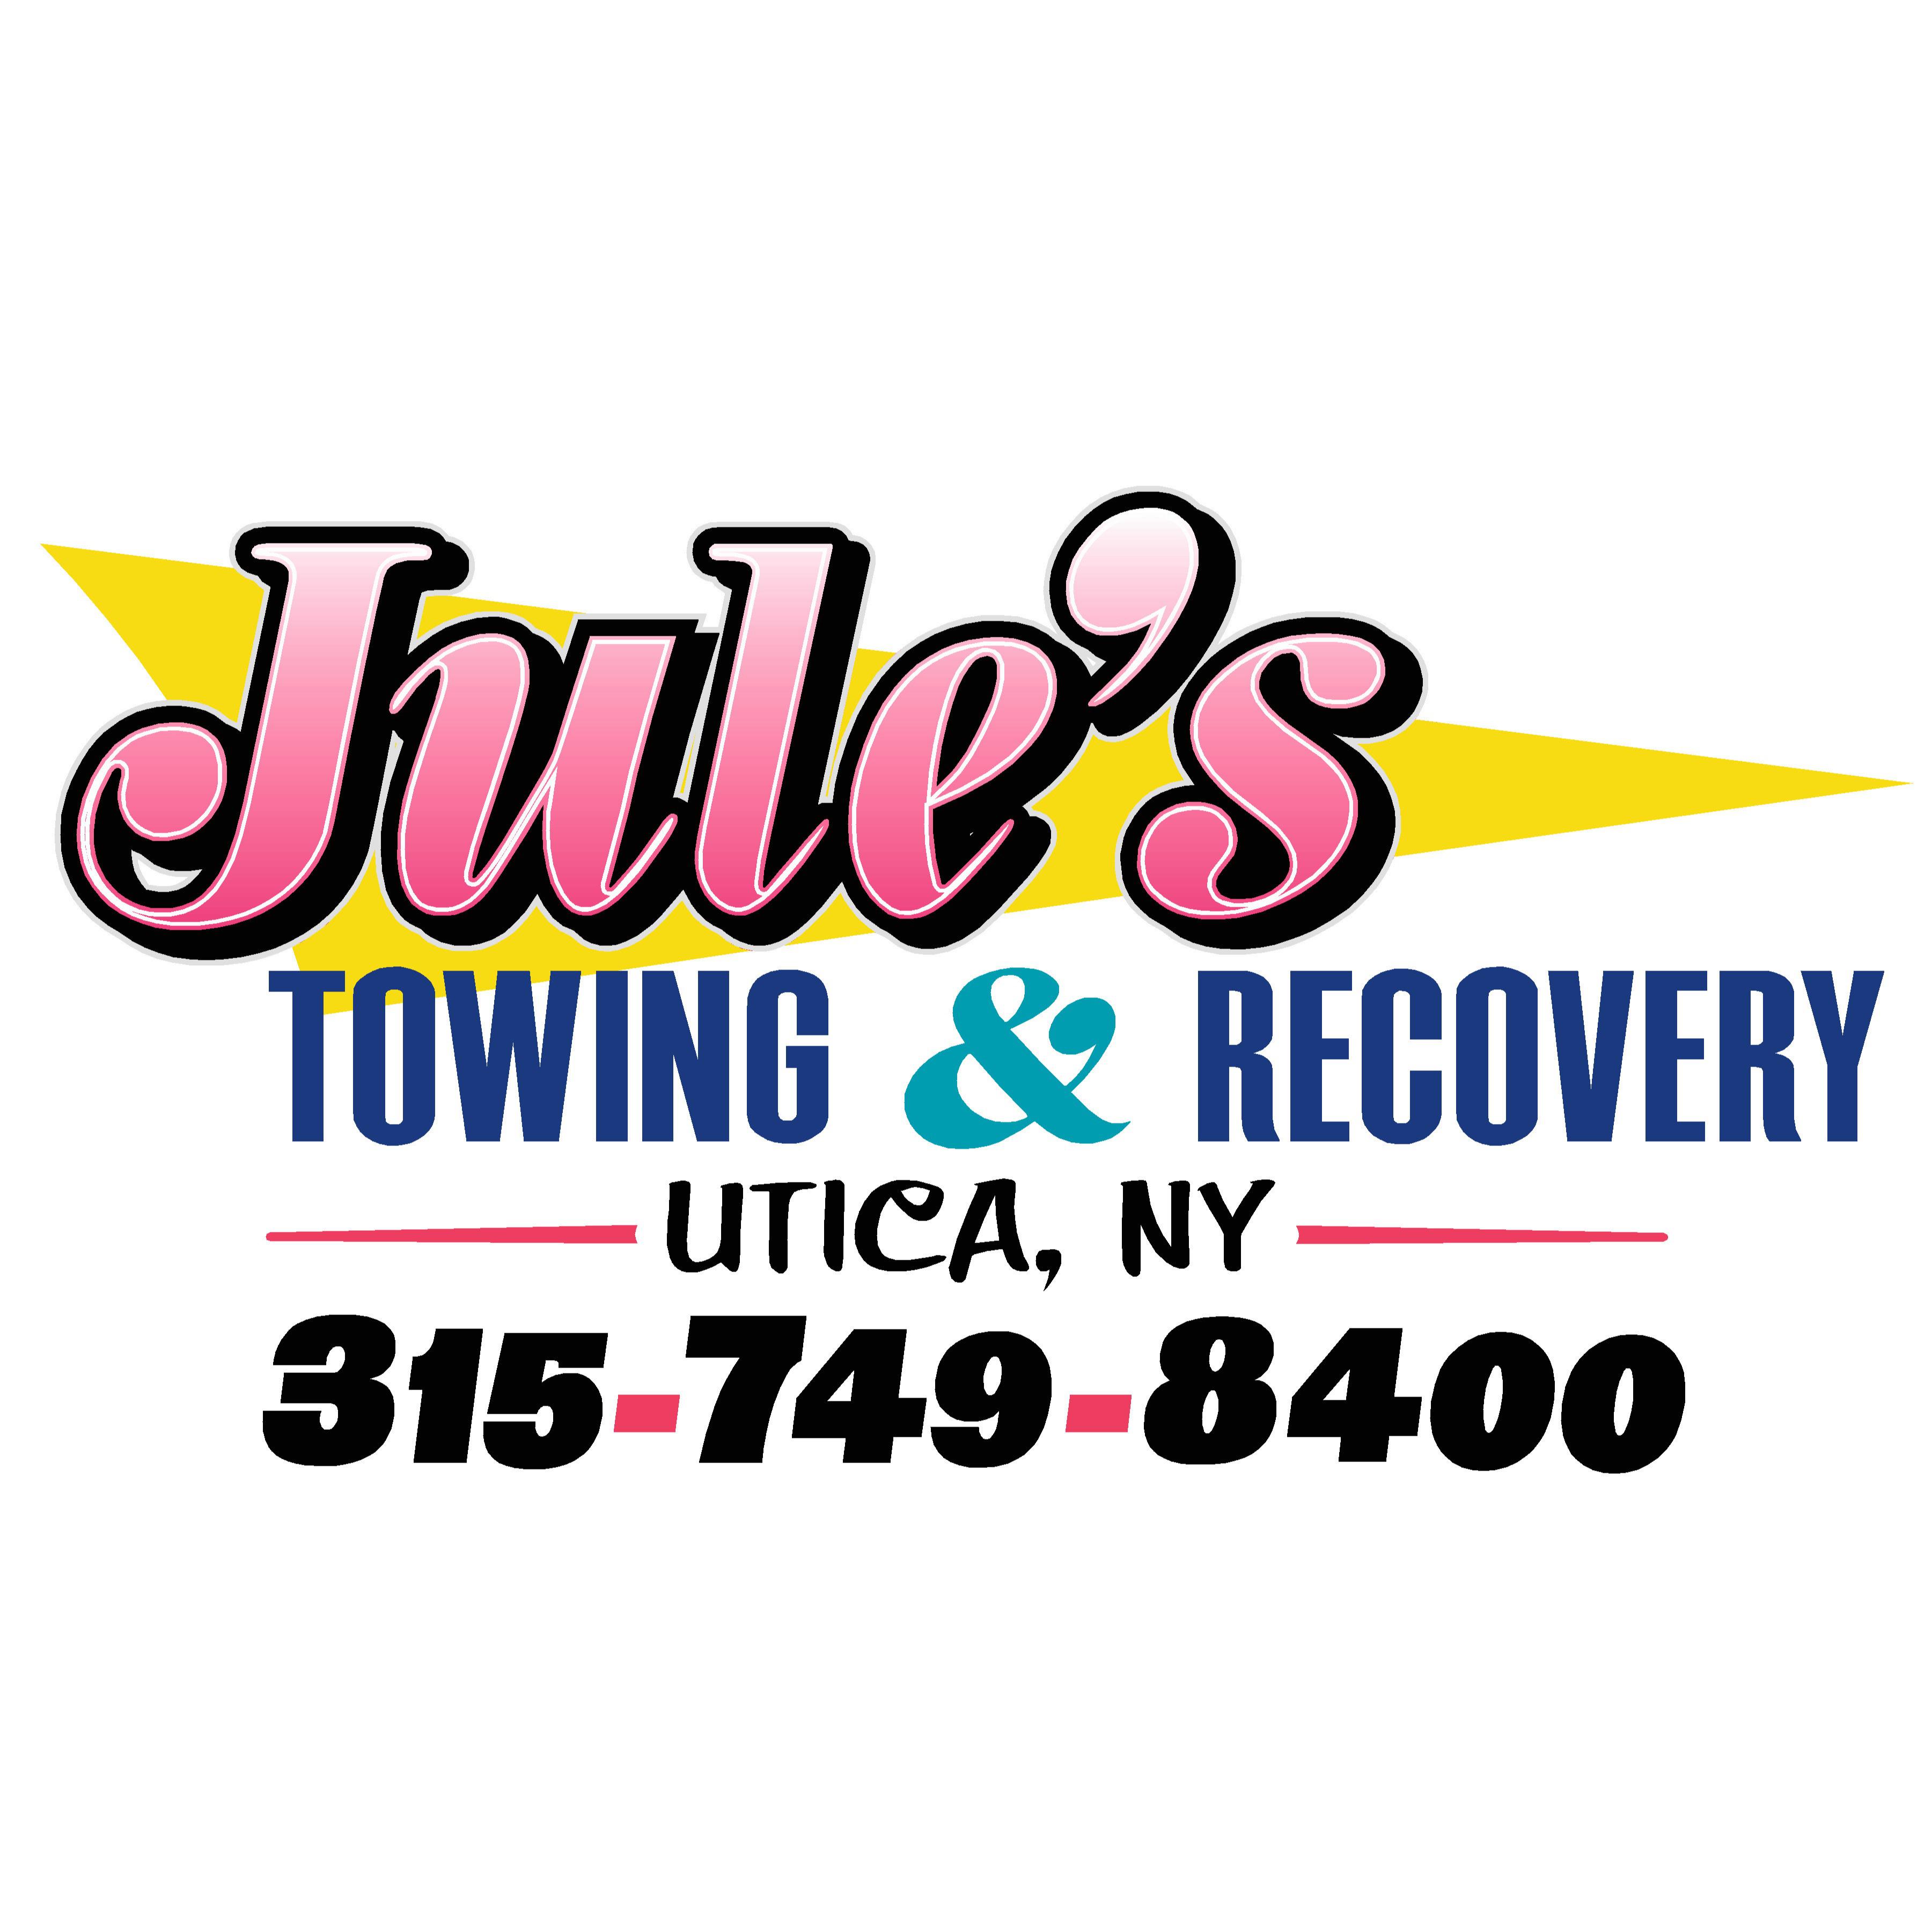 Jule's Towing & Recovery